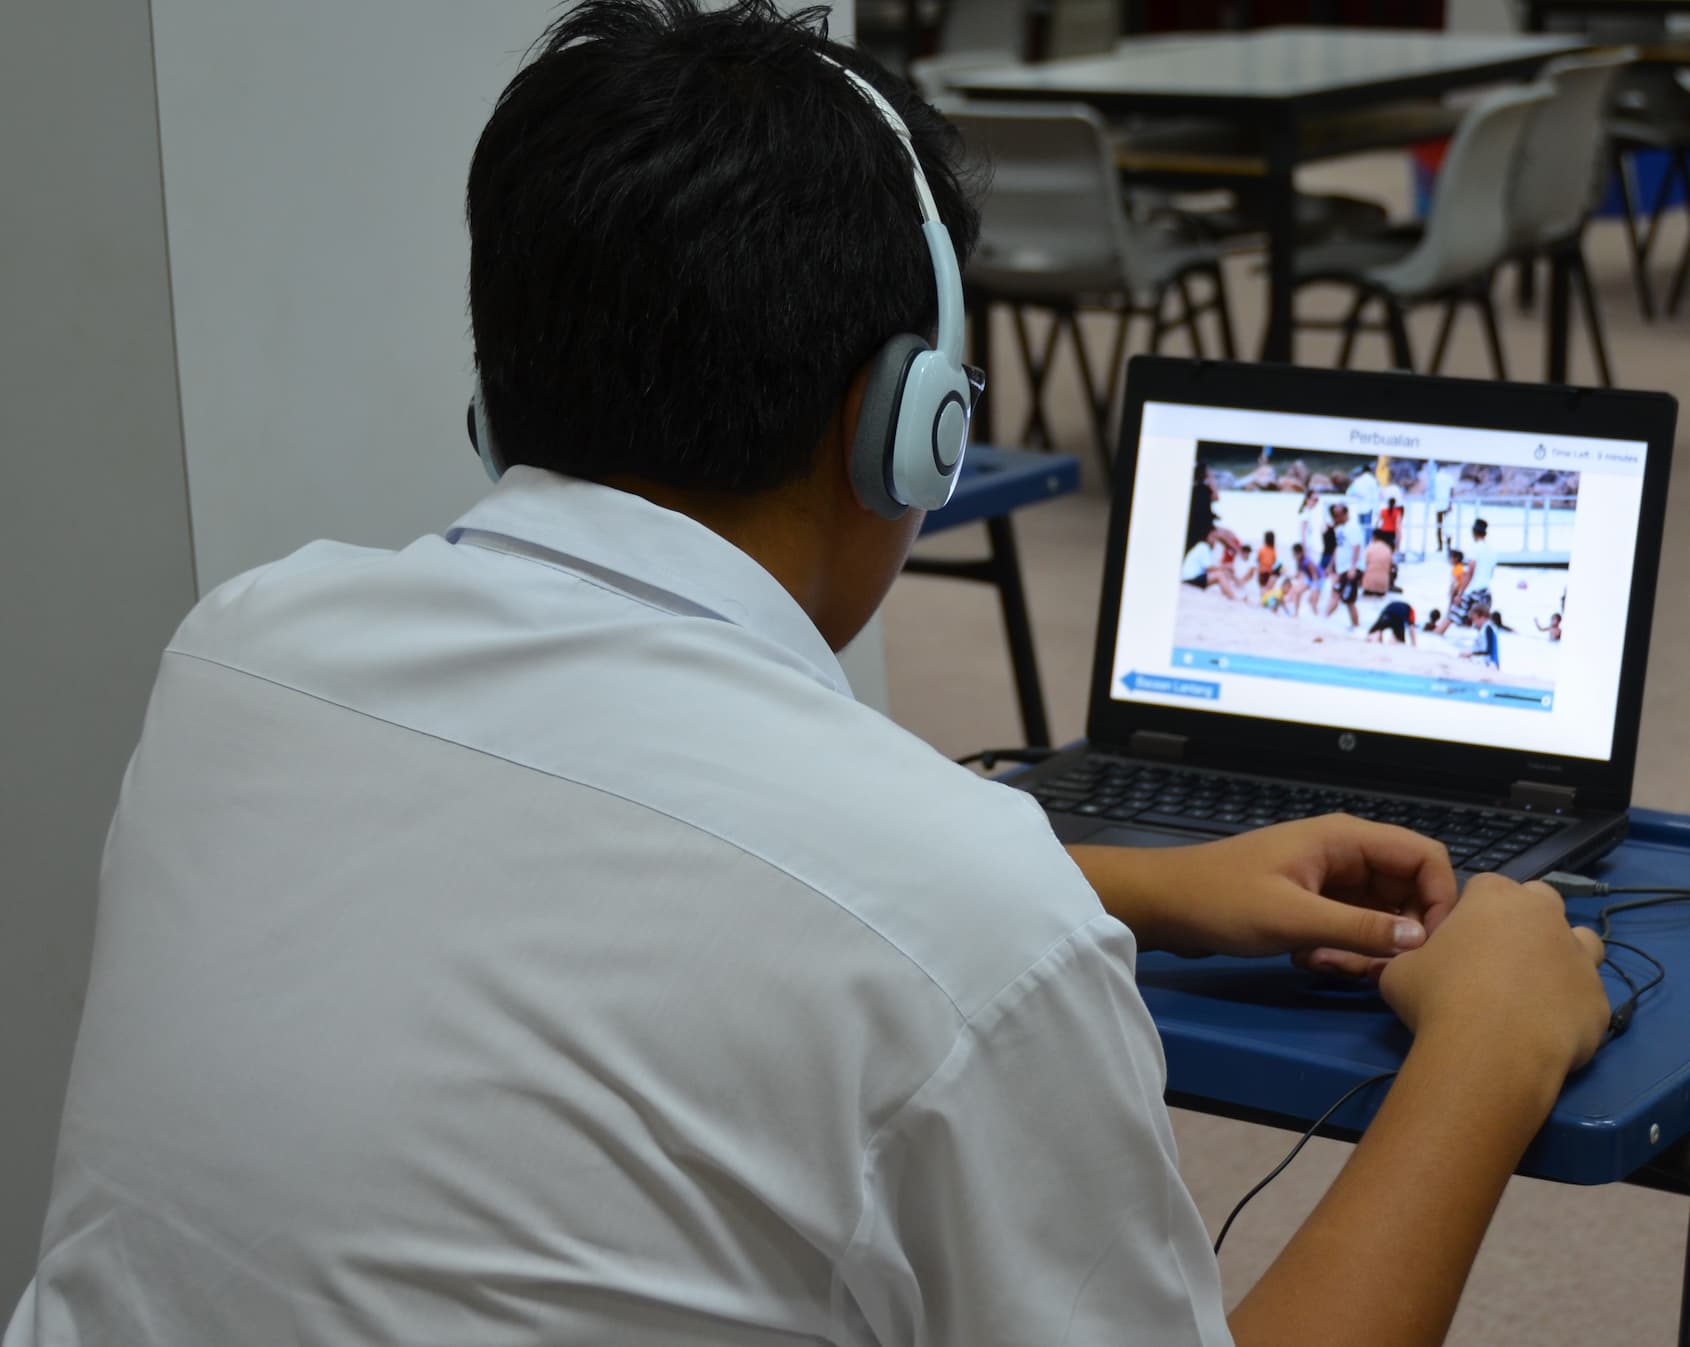 A student watches a video stimulus during a past oral examination